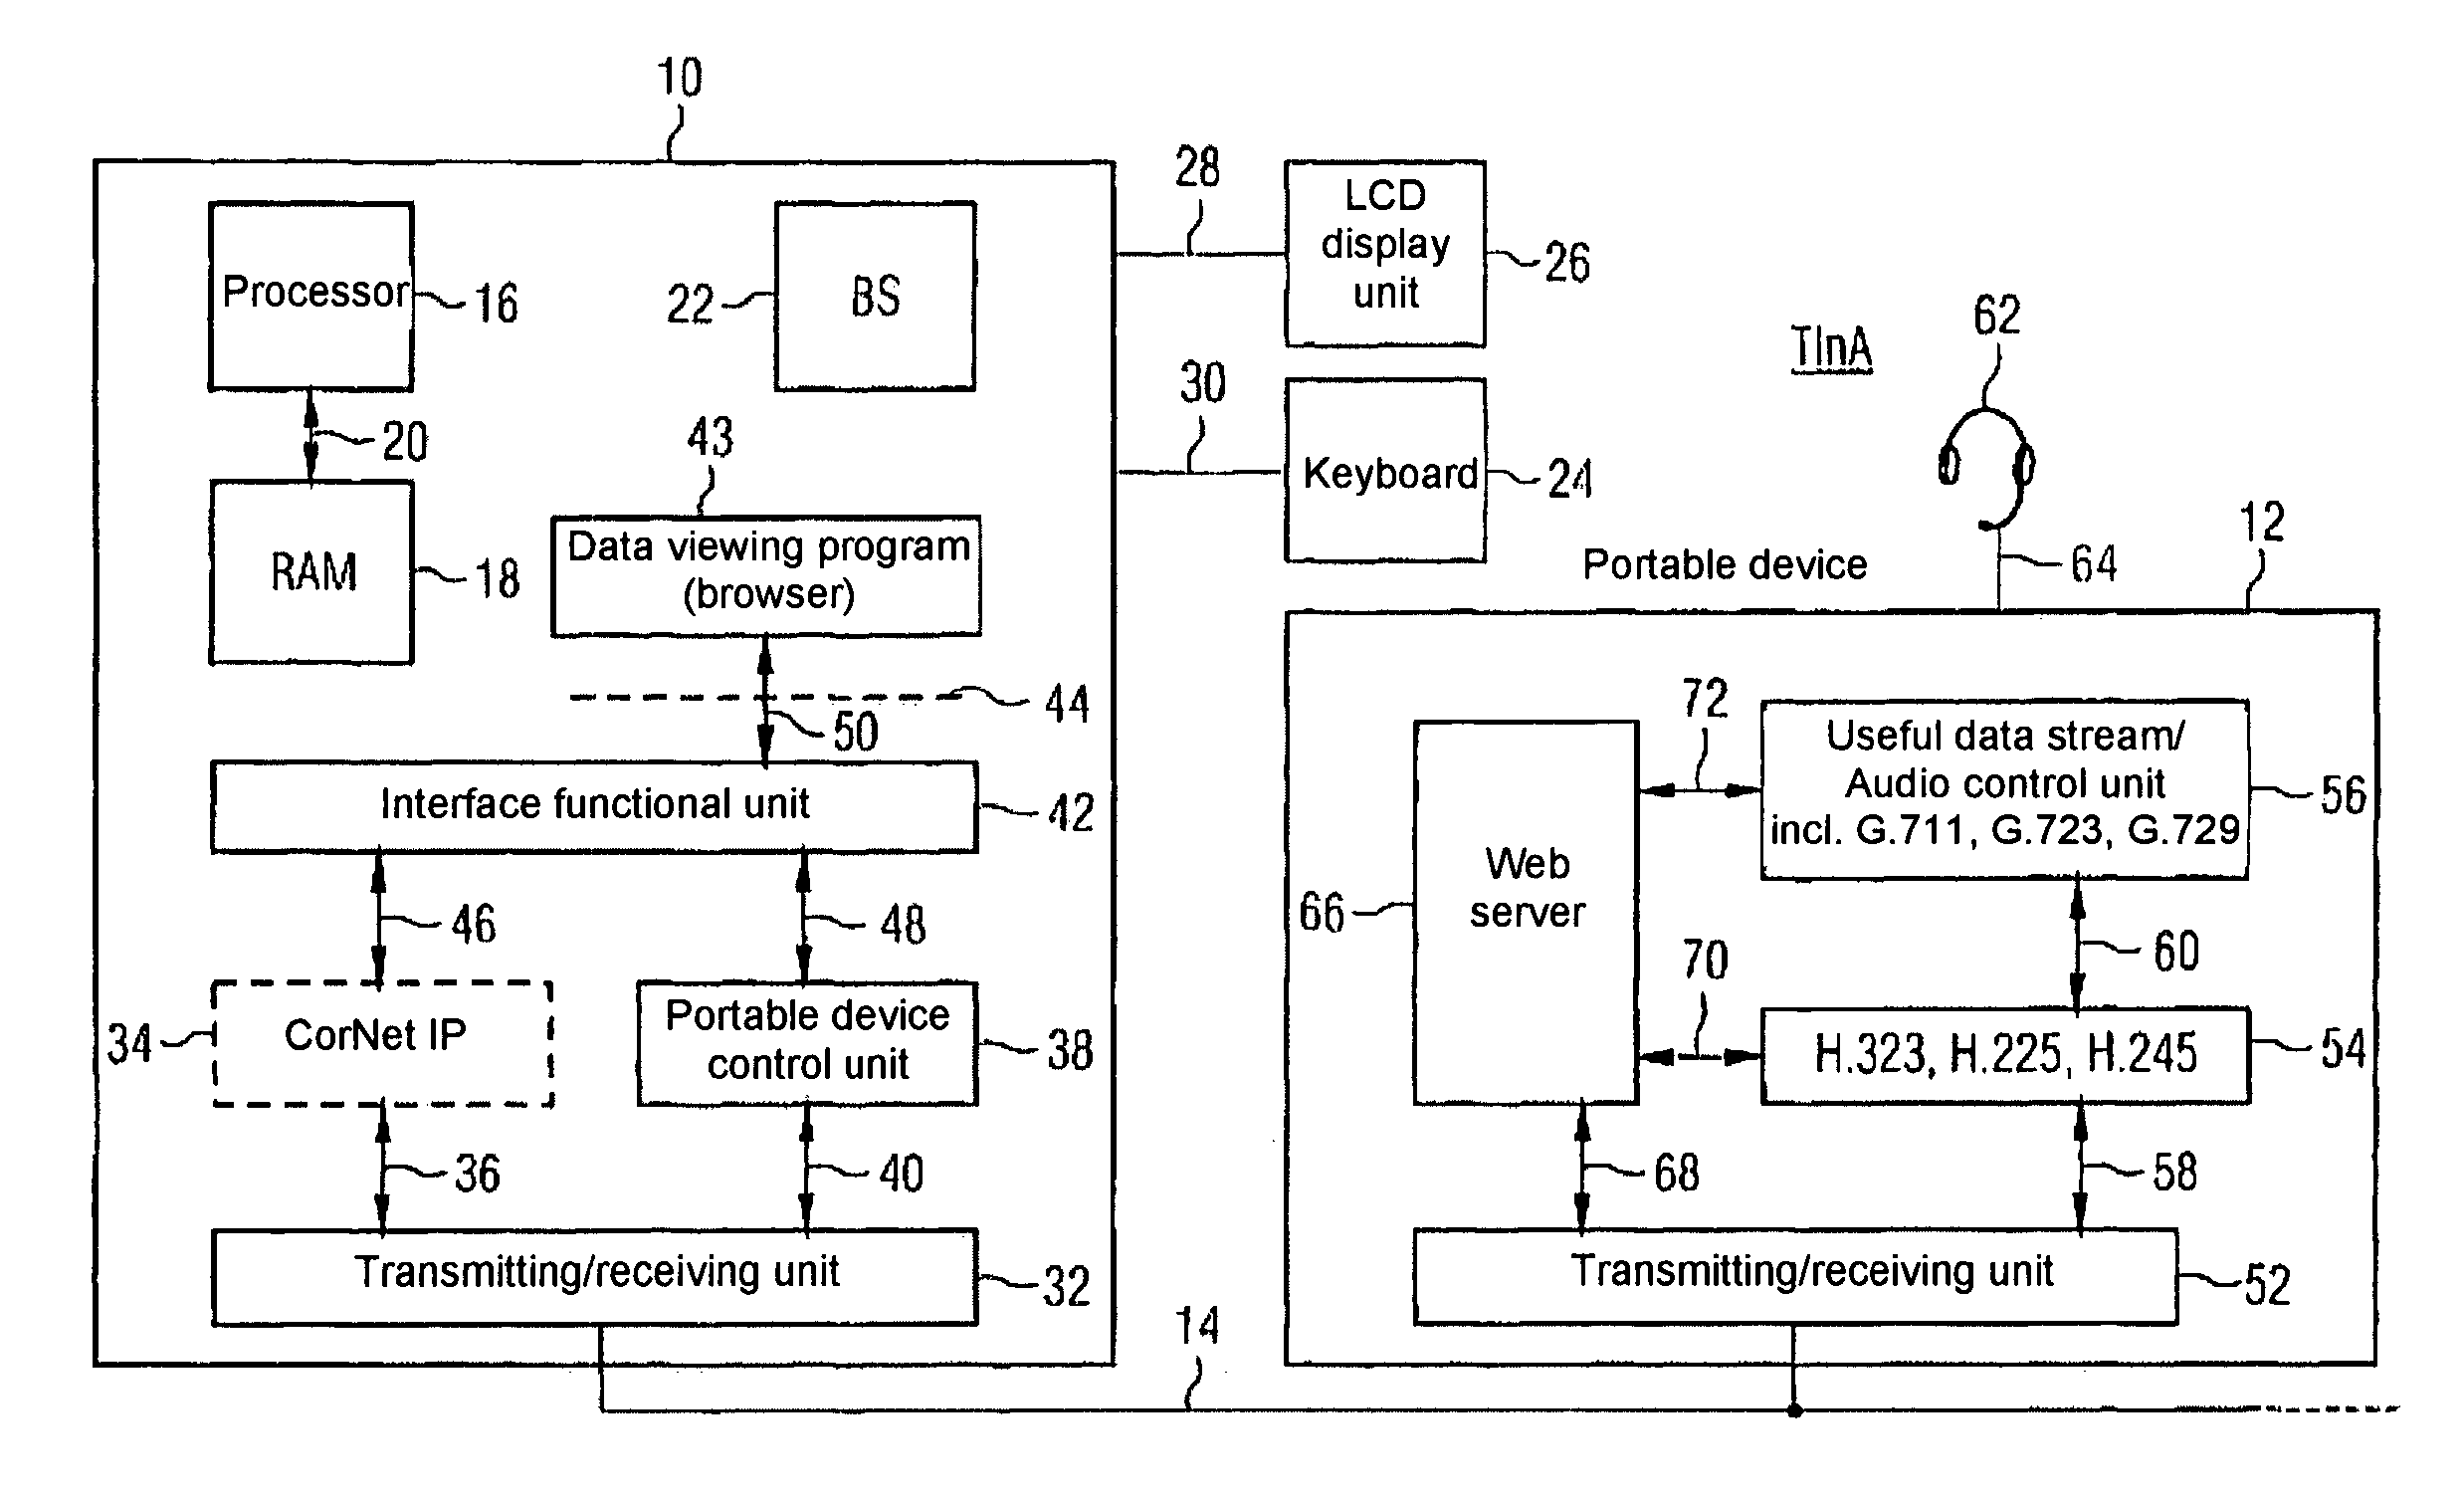 Subscriber-side unit arrangement for data transfer services and associated components